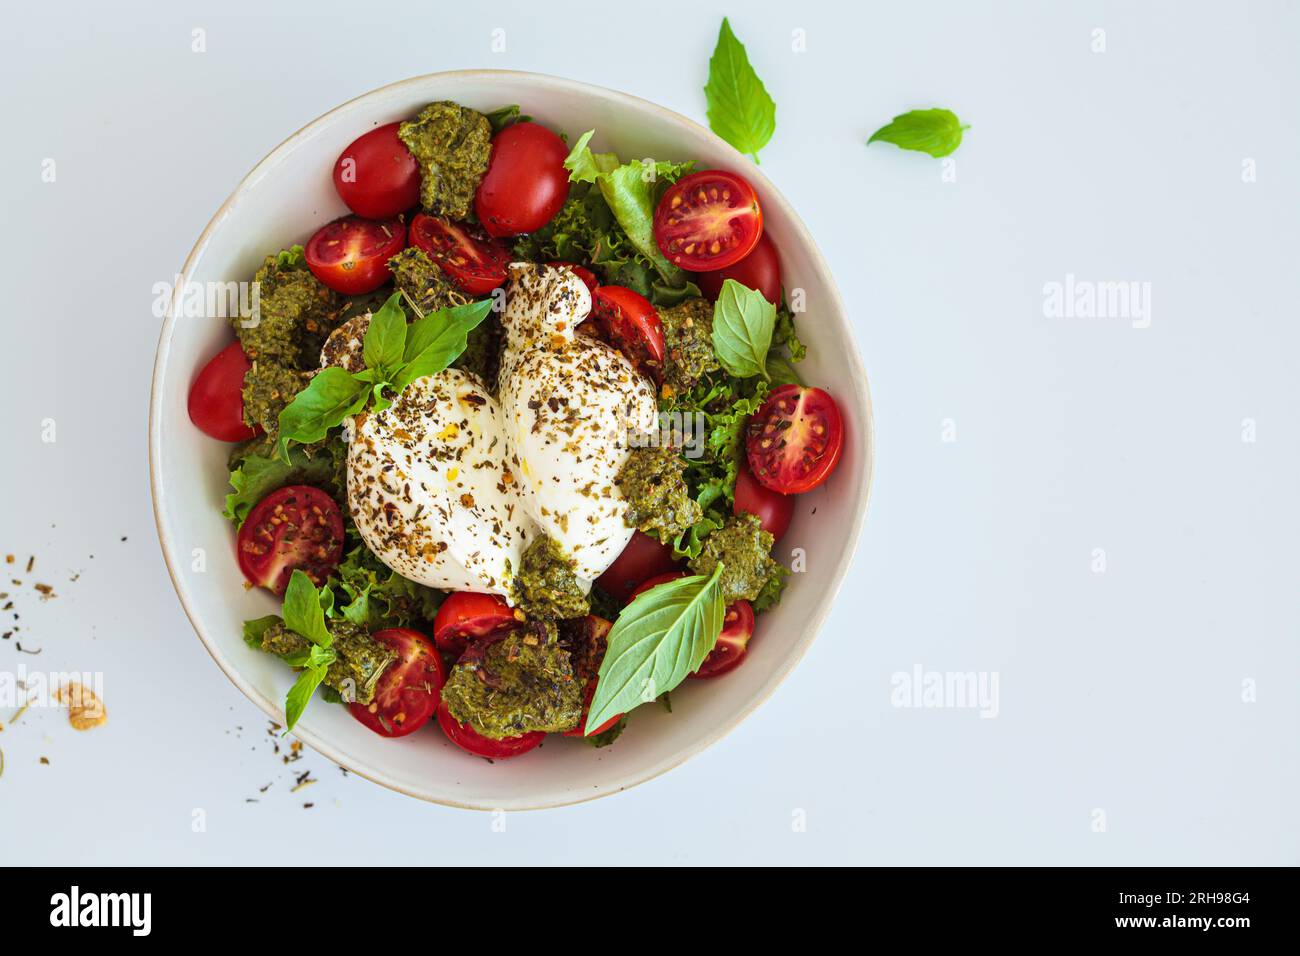 Burrata salad with cherry tomatoes, pesto and spices in a bowl on a white background, top view. Stock Photo